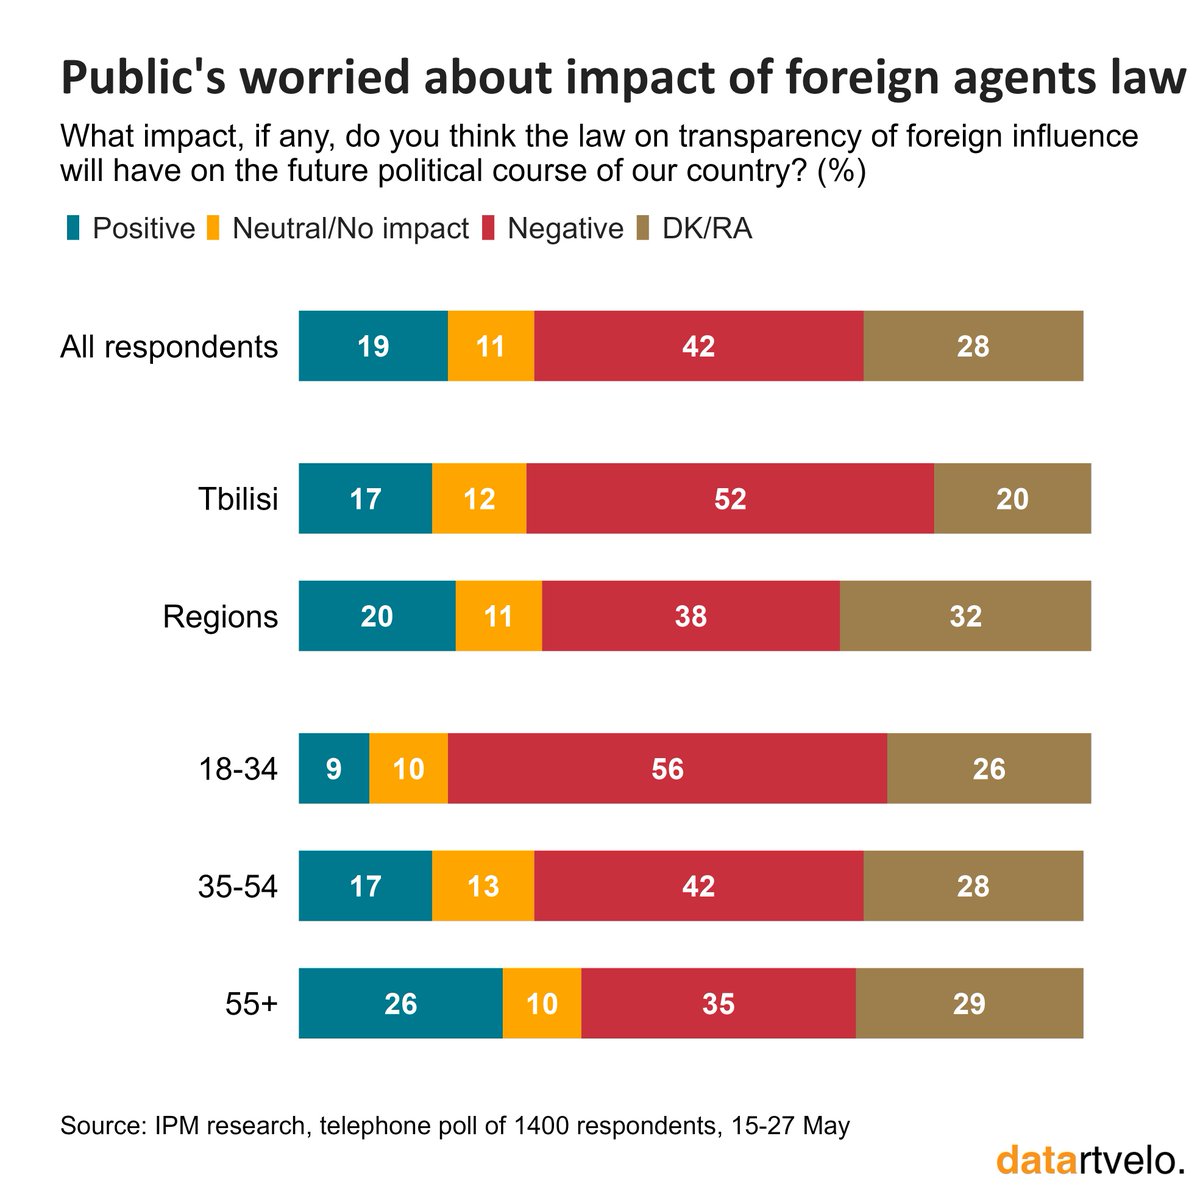 A plurality of Georgians believe that the foreign agents law will have a negative impact on the country's political future. Tbilisi residents and young people in particular are more concerned about the law's impact.